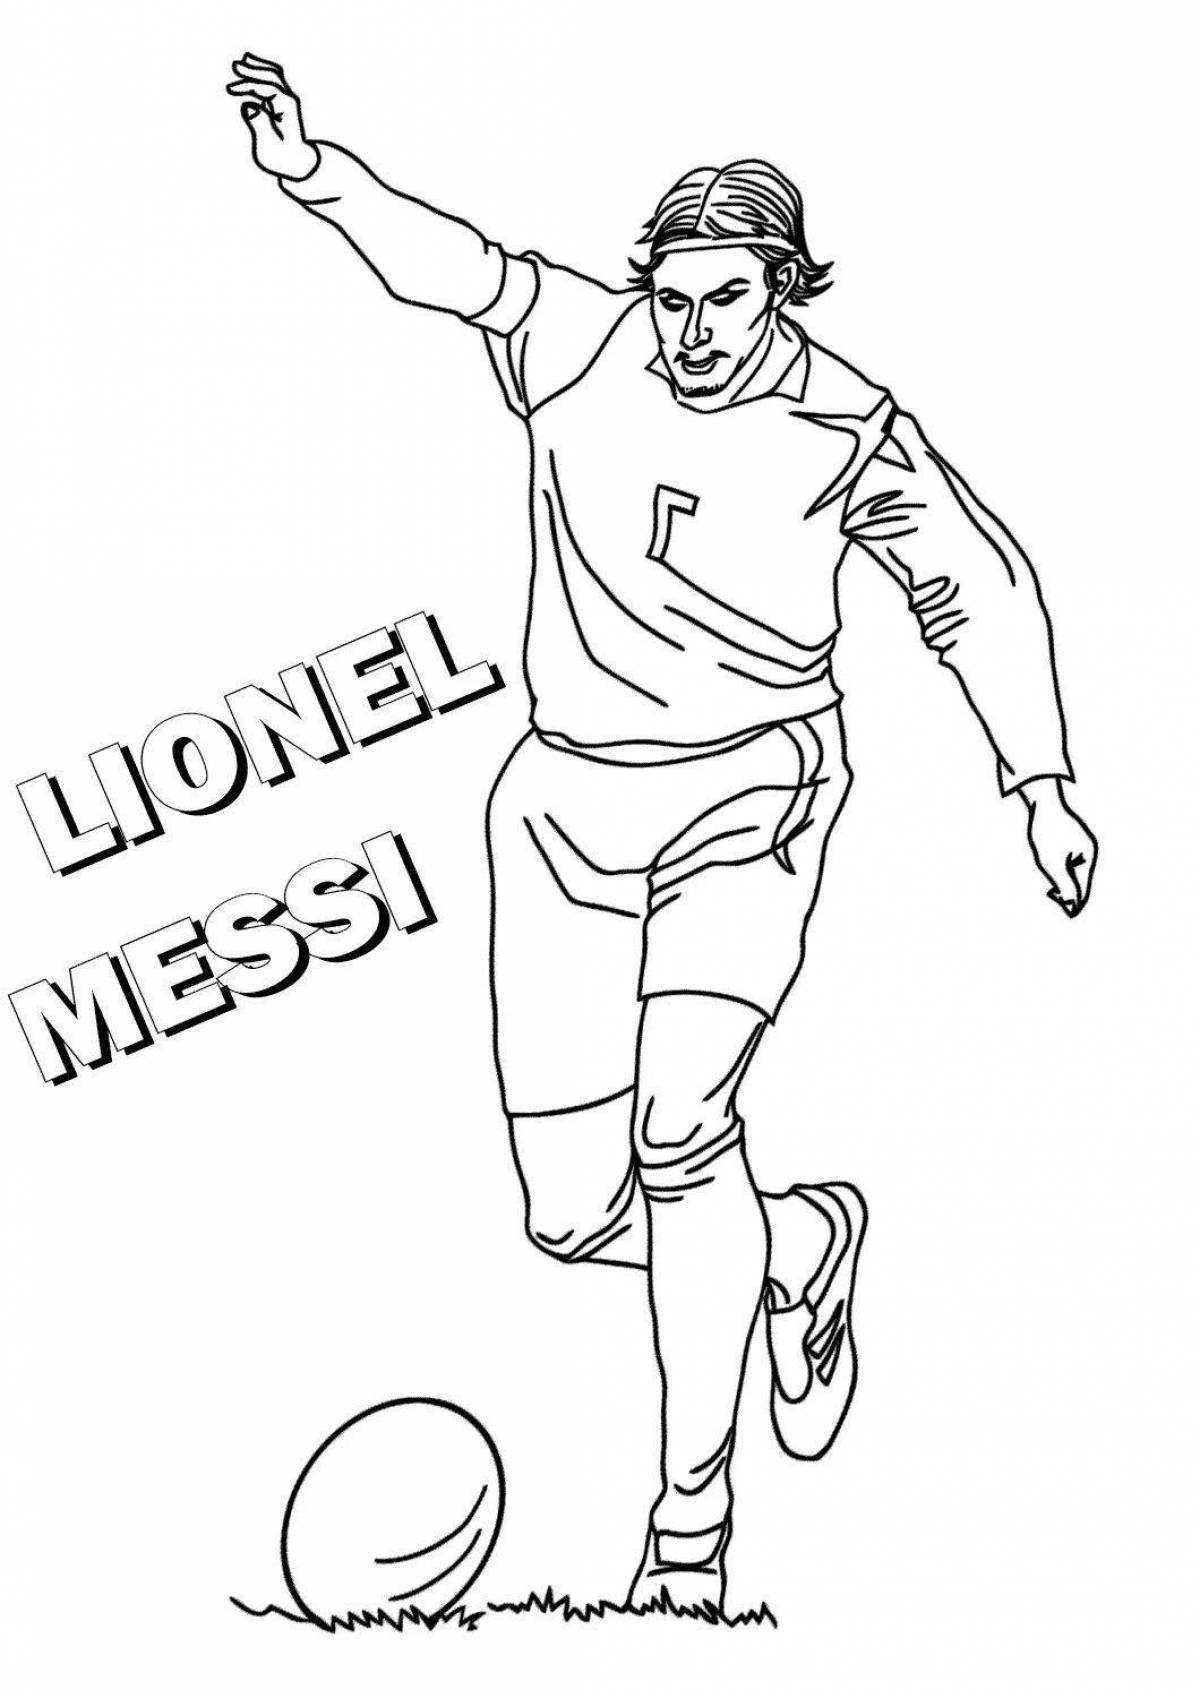 Leo messi's dazzling coloring book